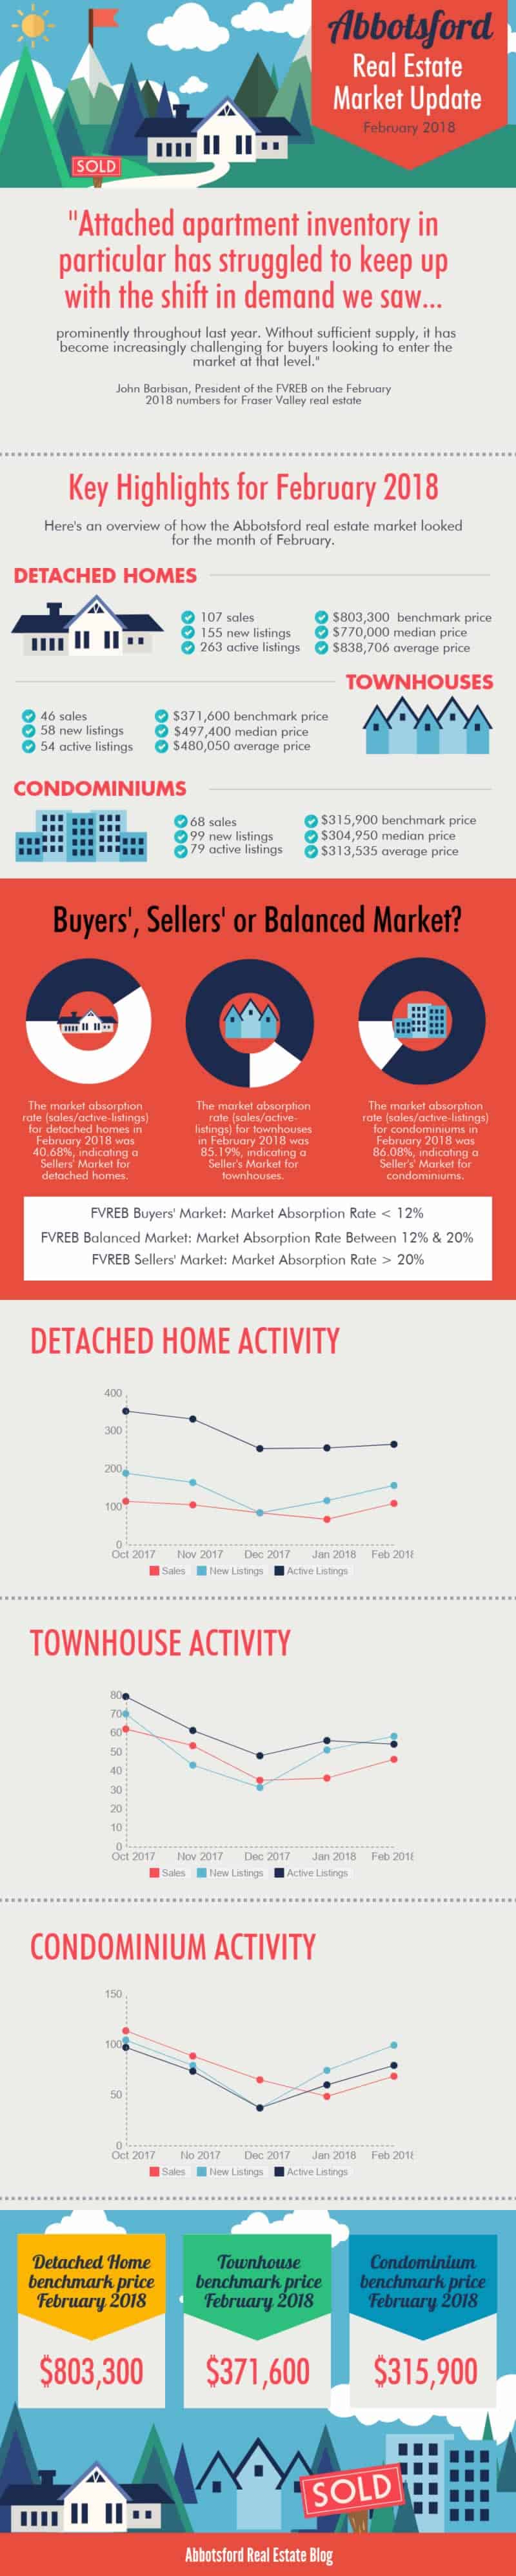 Abbotsford Townhouse Market Update February 2018 Infographic